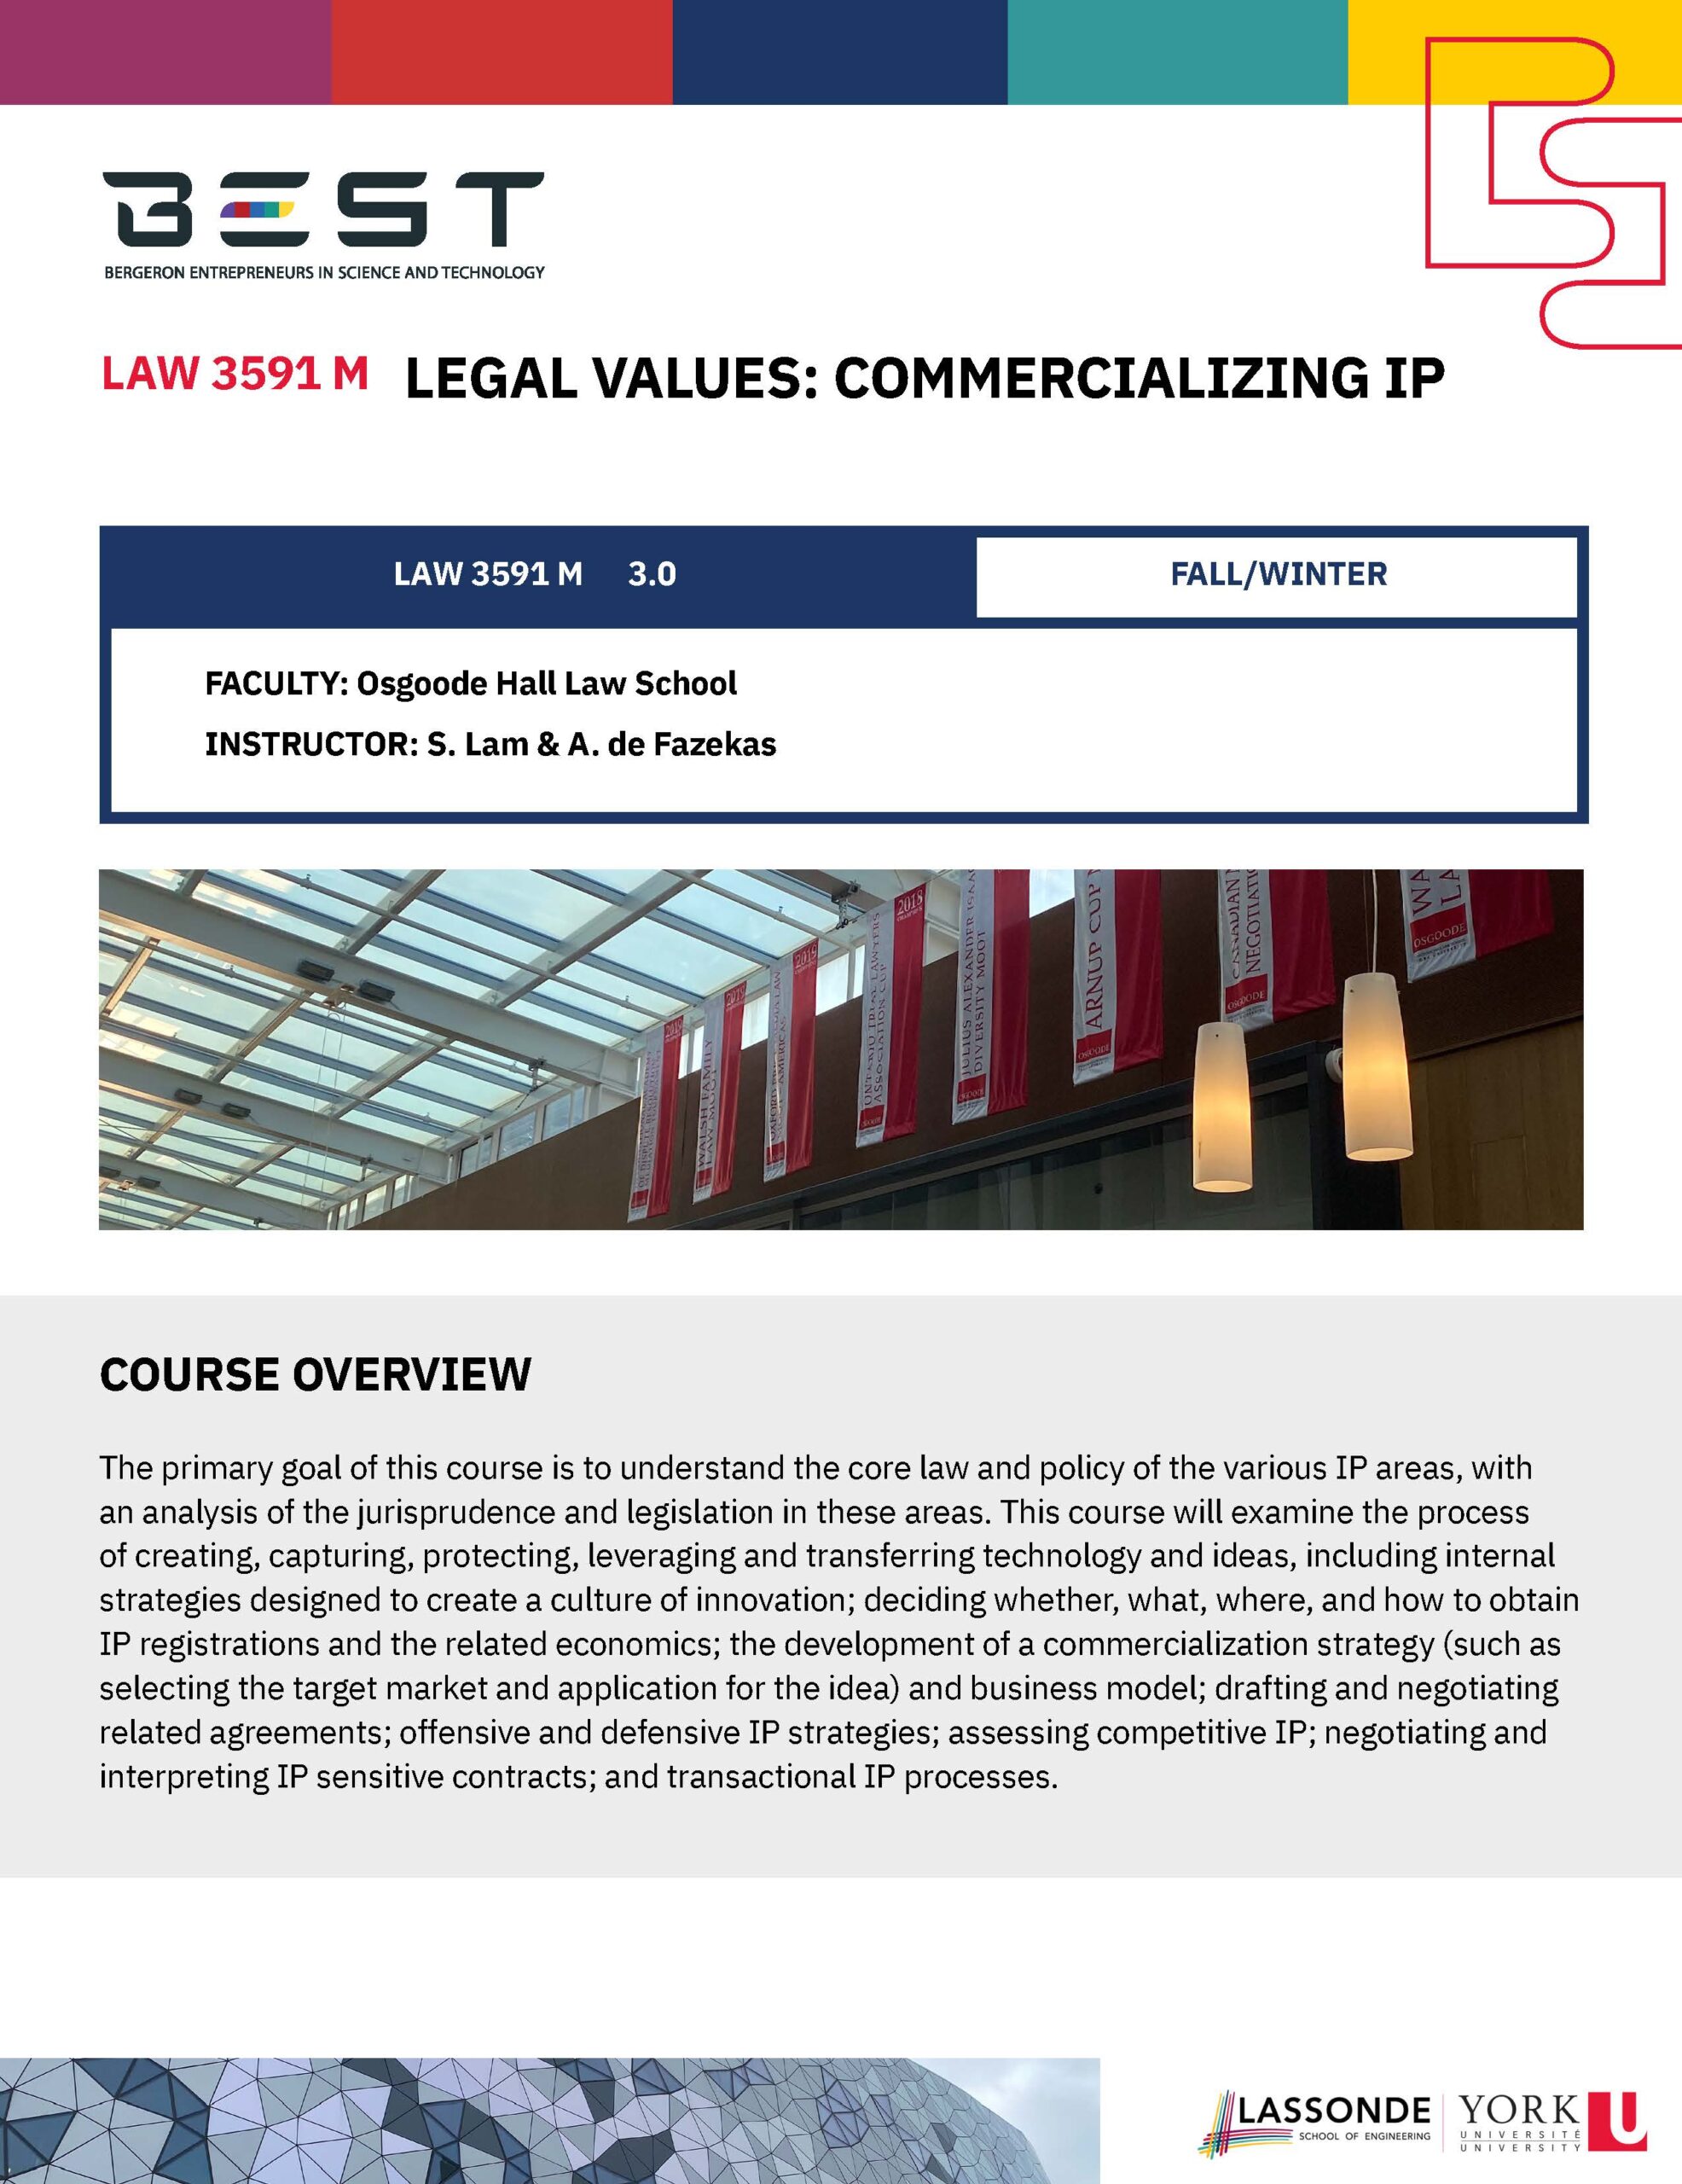 LAW 3591M
Legal Values: Commercializing IP (poster)